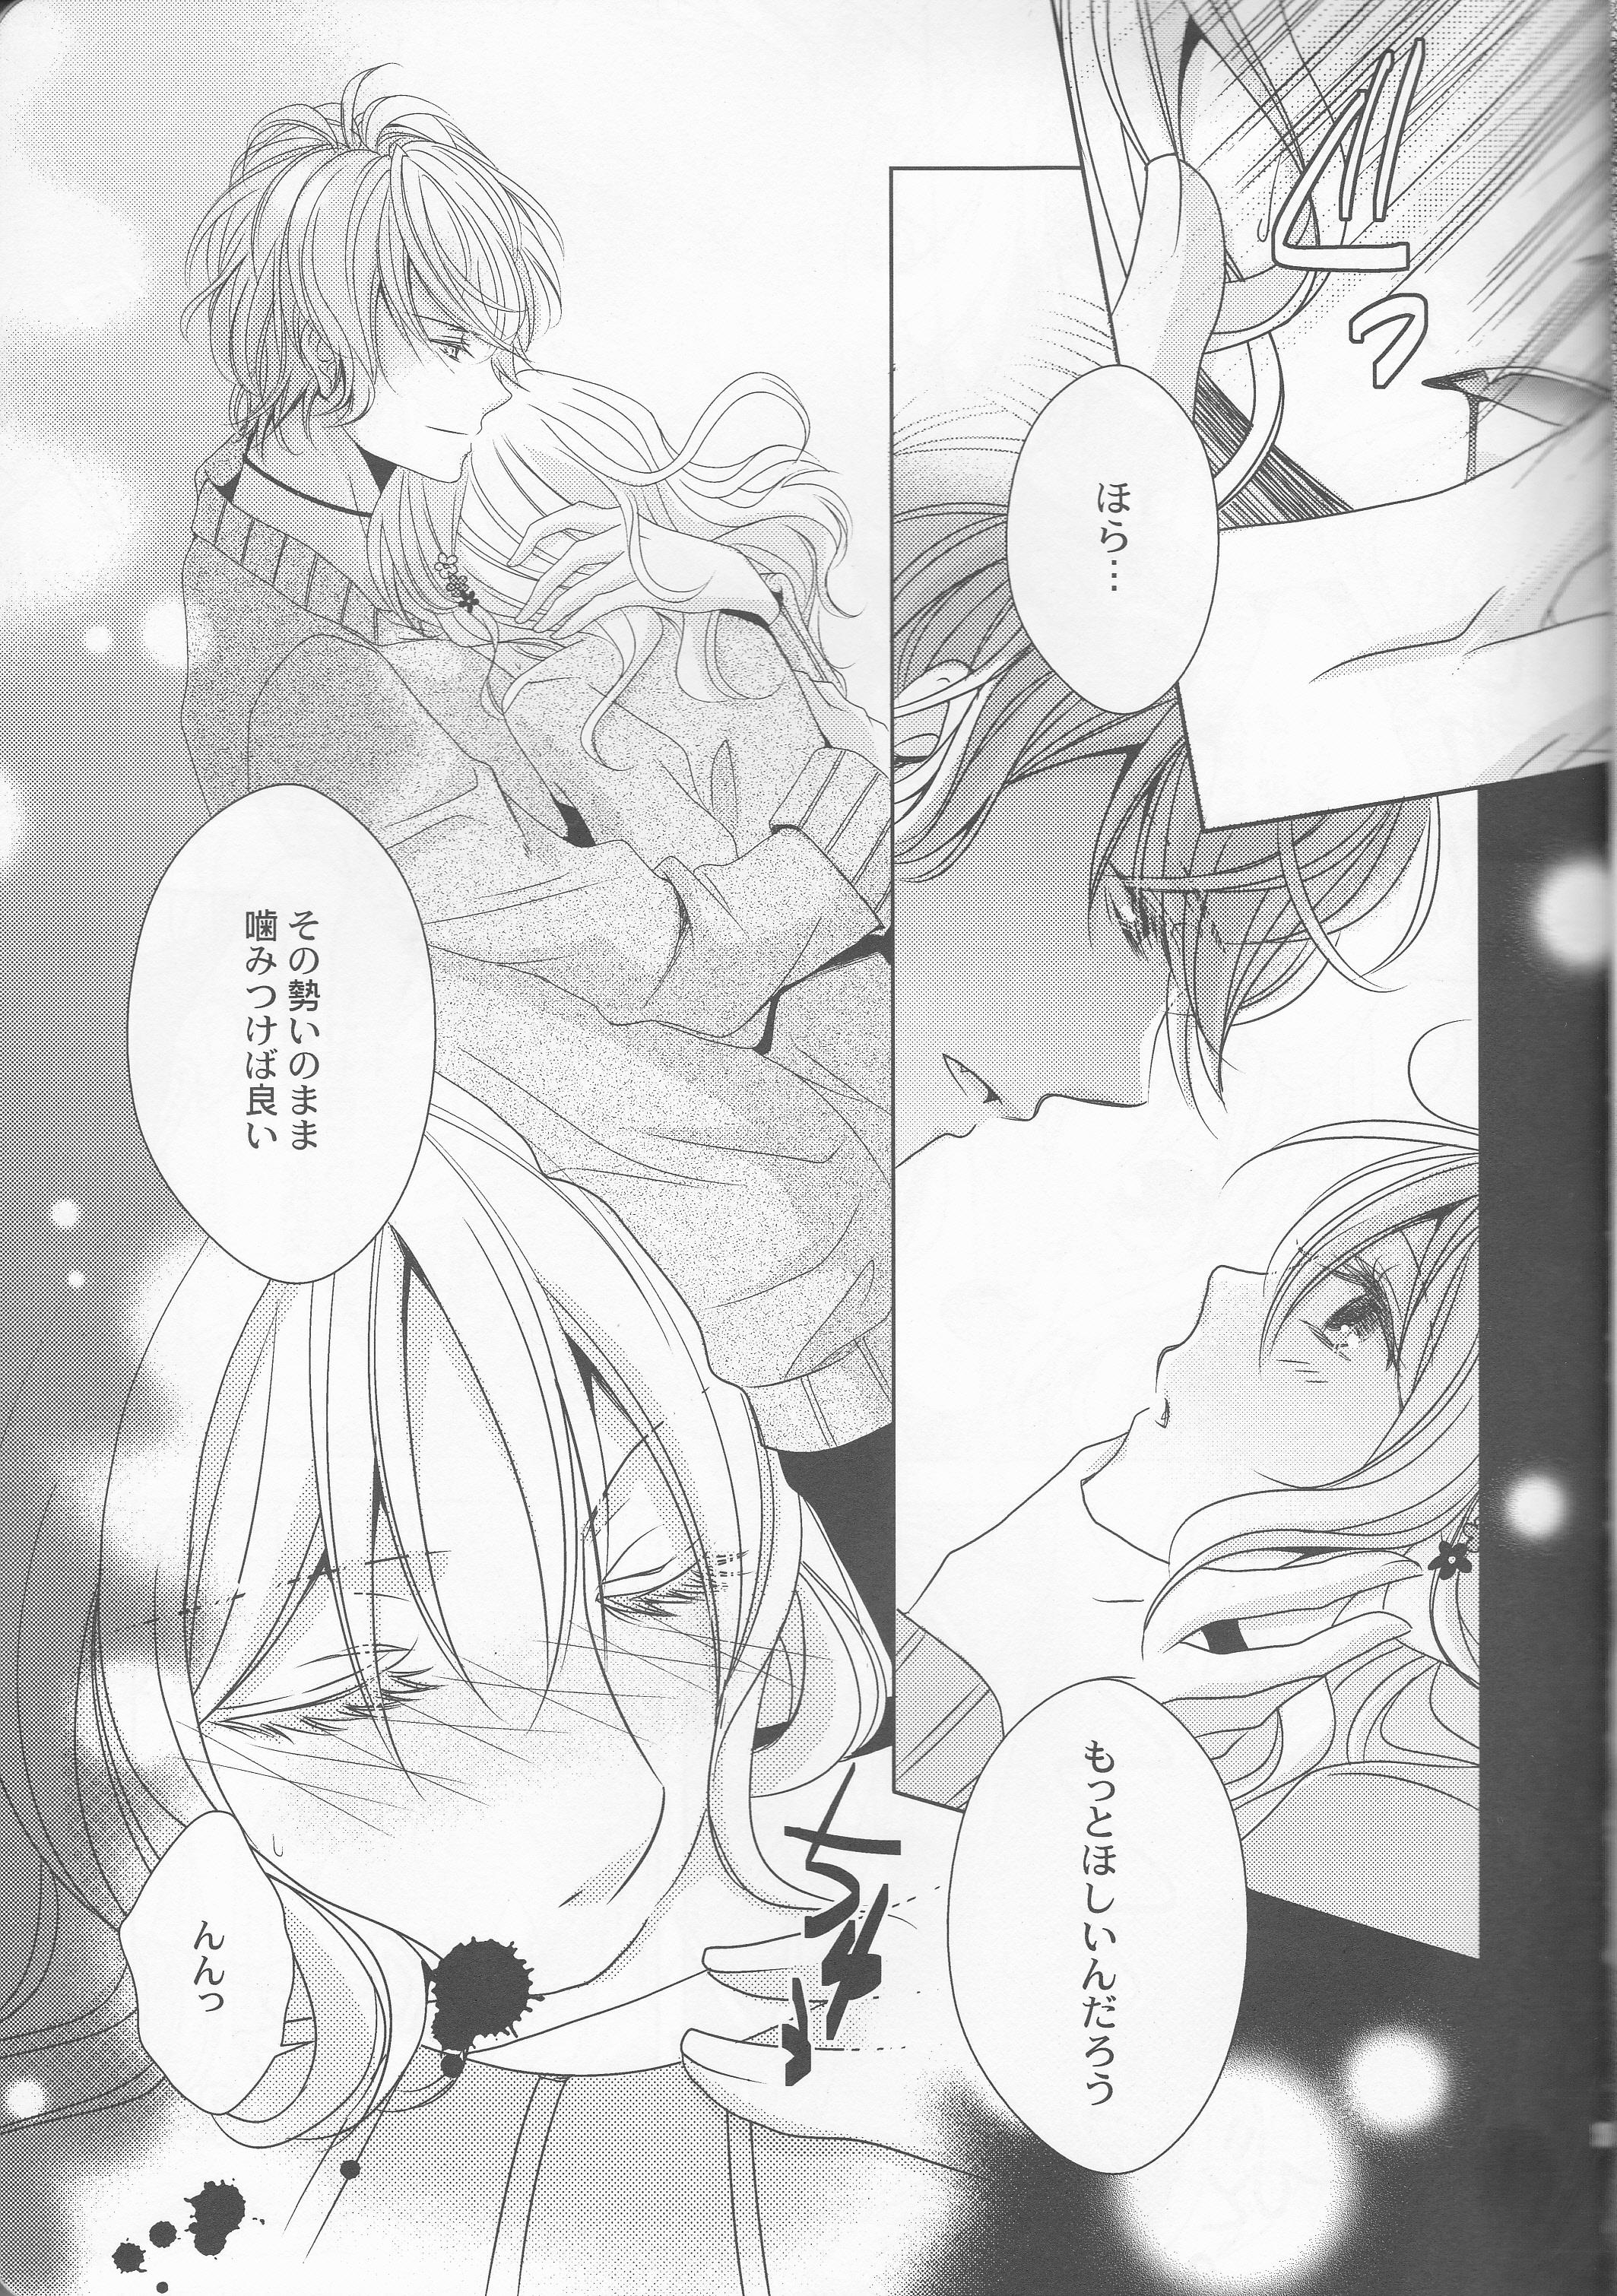 Nudity How to Blood - Diabolik lovers Putaria - Page 7